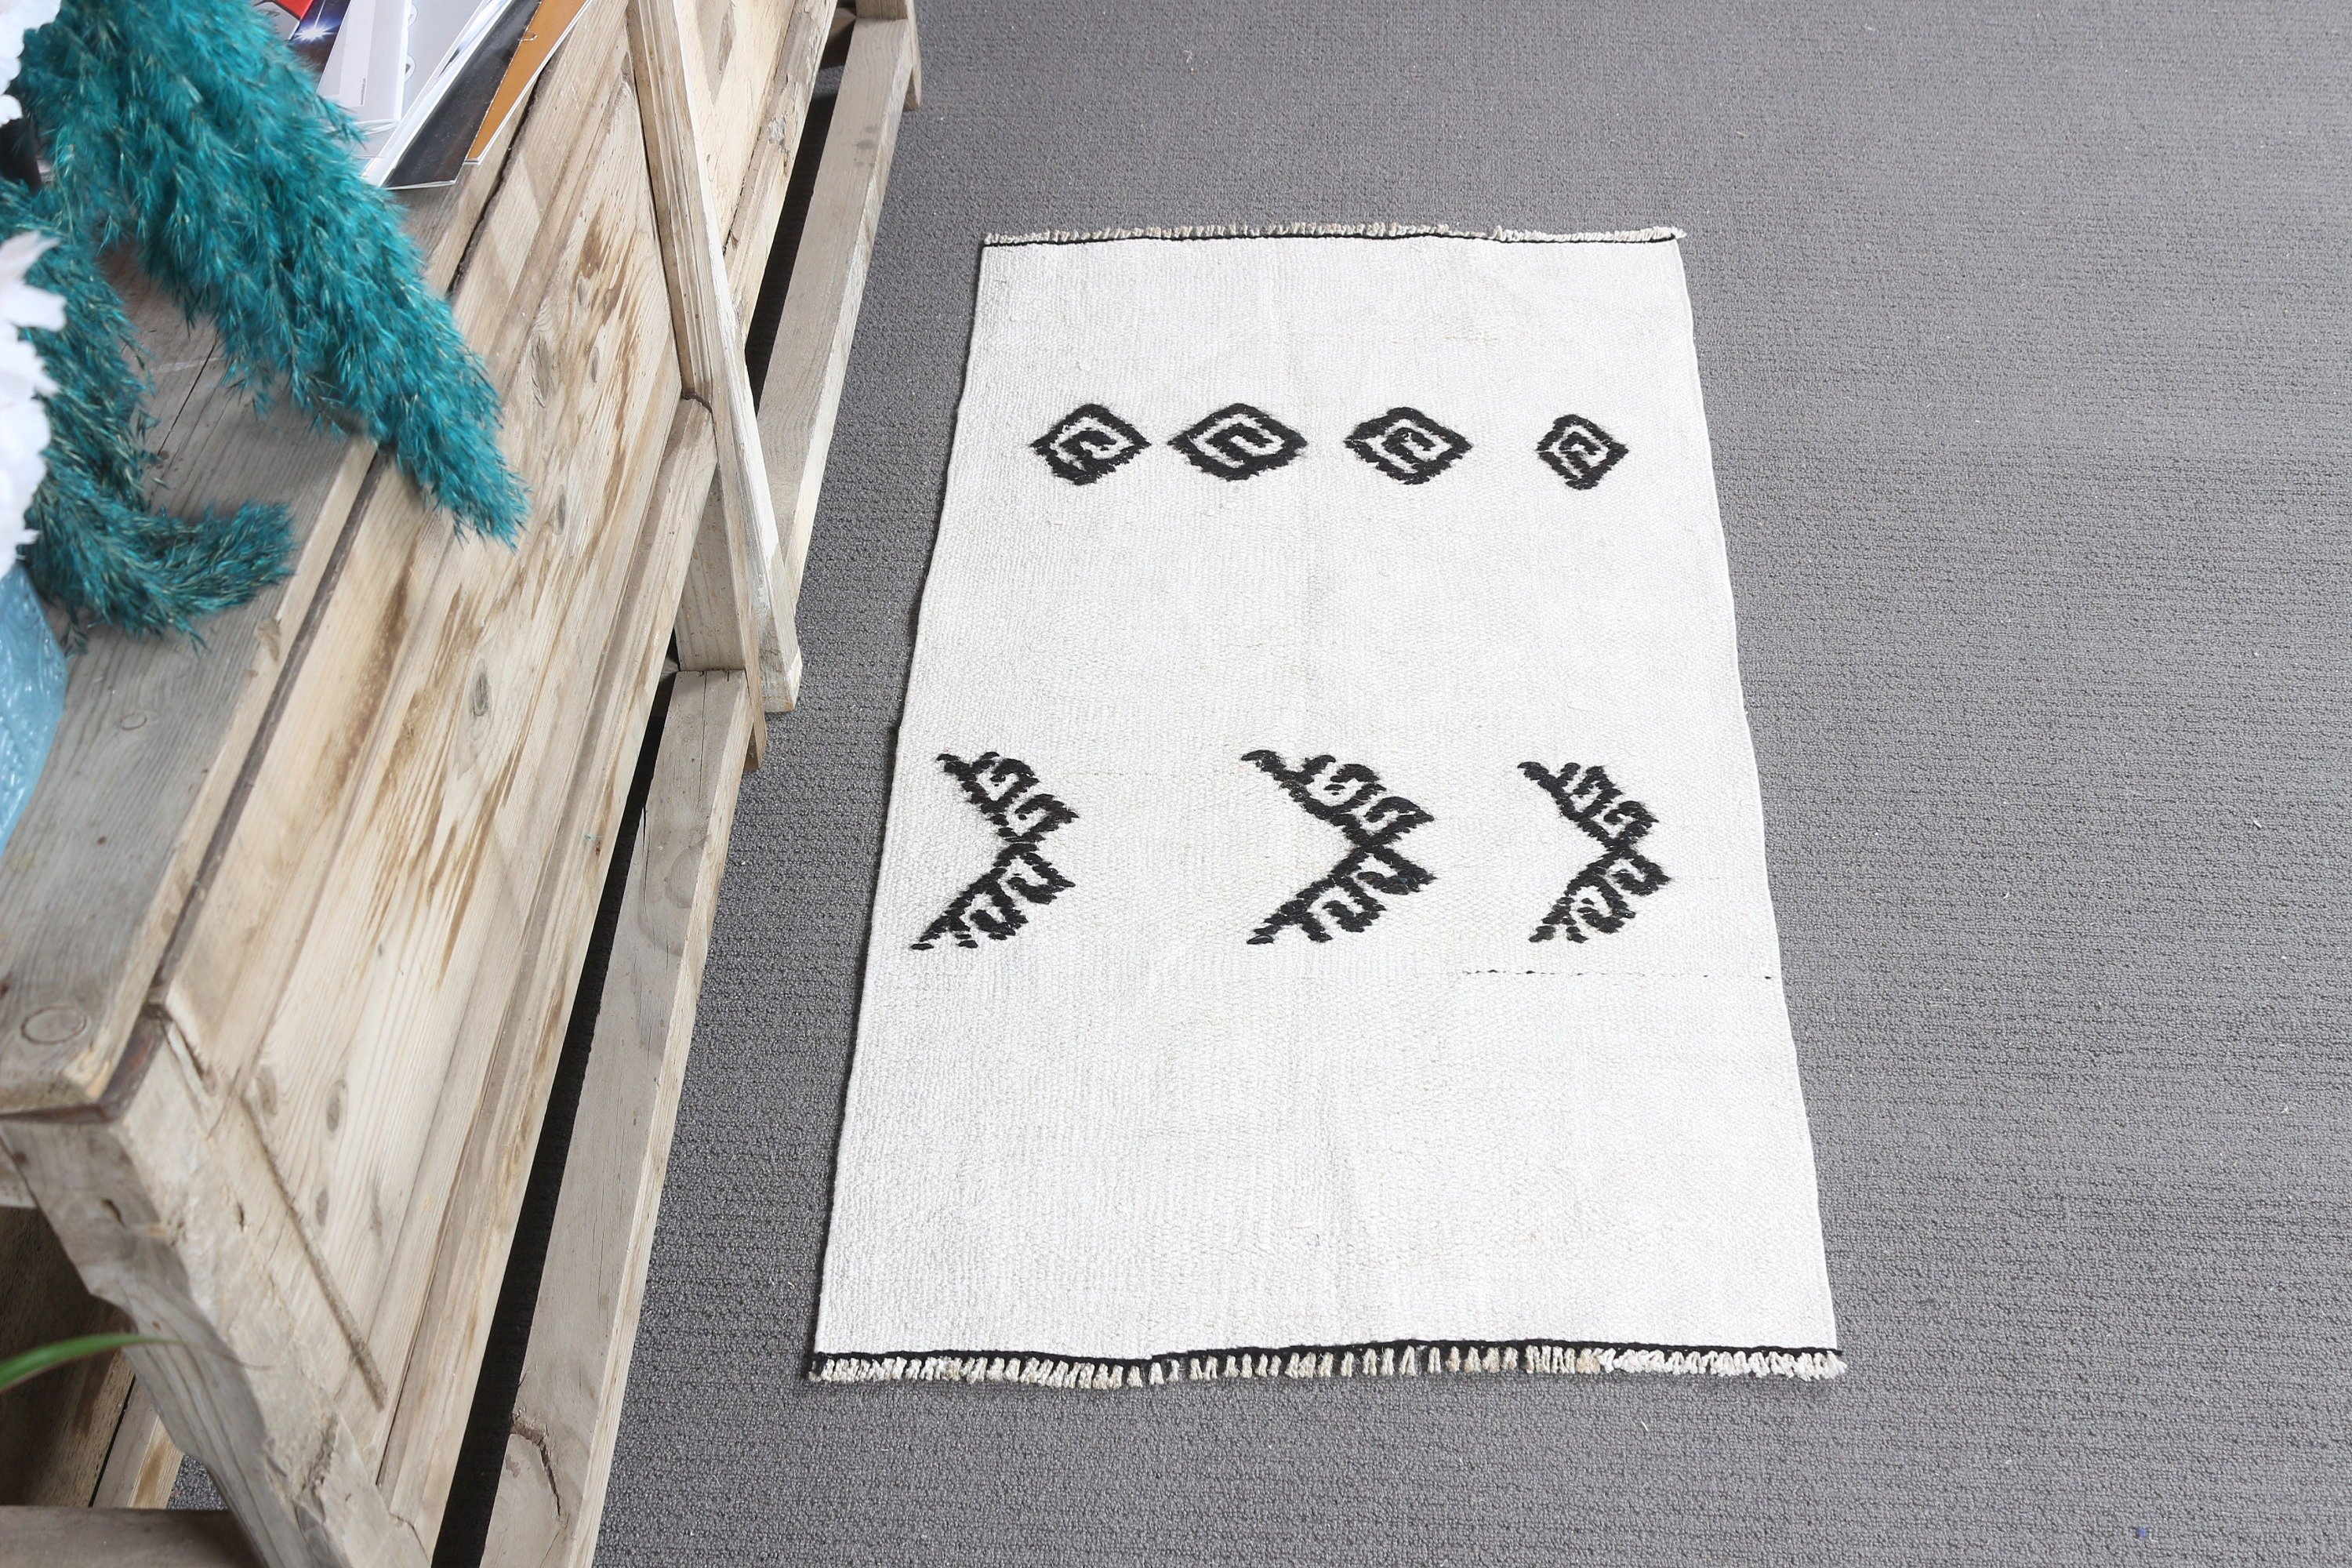 Rugs for Kitchen, Nursery Rugs, White Bedroom Rug, Kitchen Rug, Entry Rug, Turkish Rugs, 1.8x3.4 ft Small Rugs, Vintage Rugs